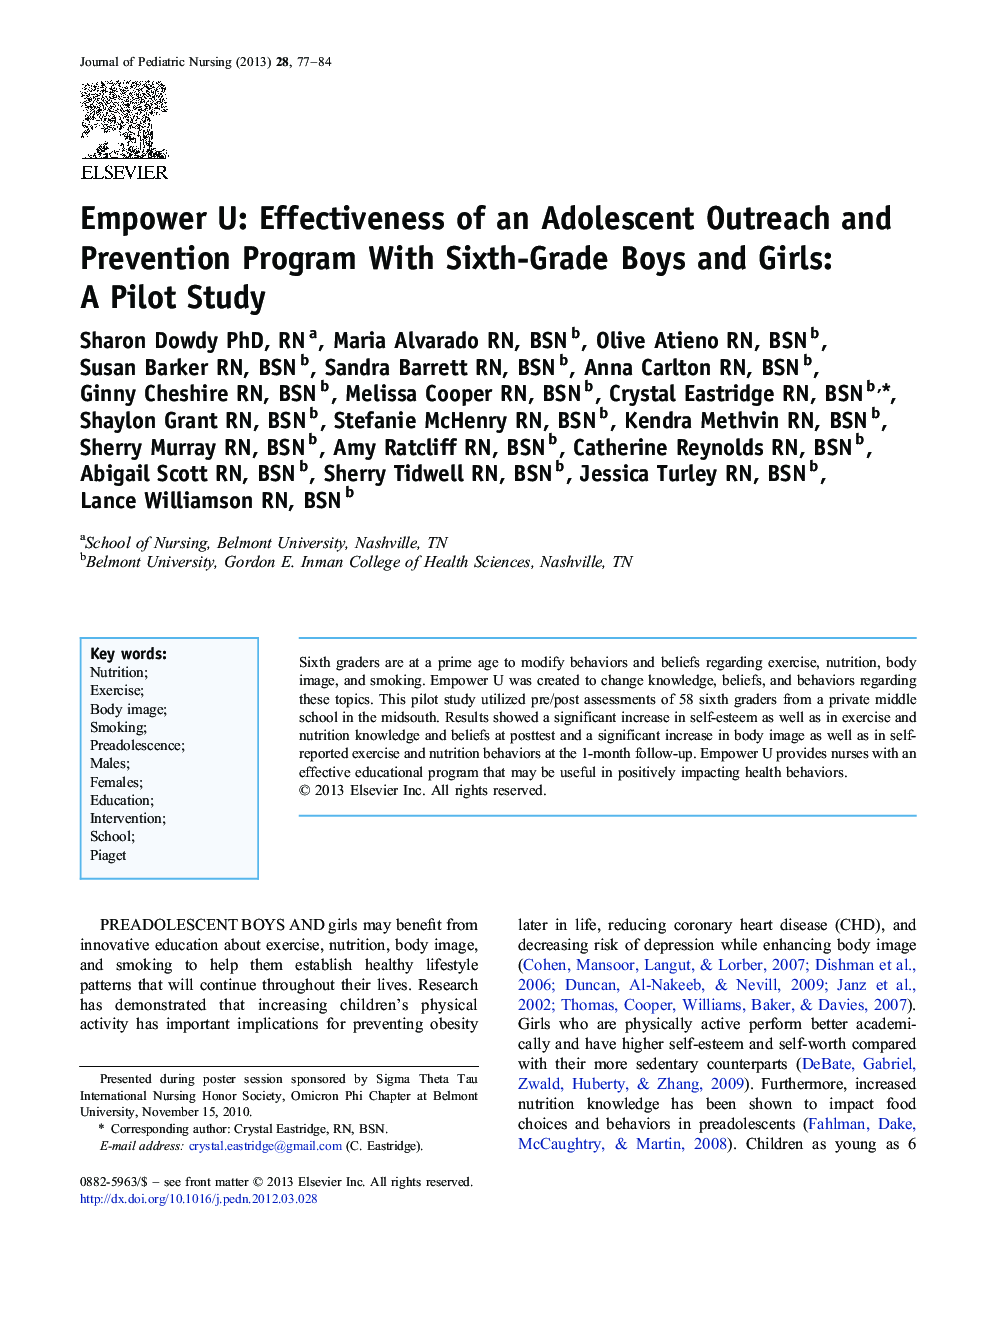 Empower U: Effectiveness of an Adolescent Outreach and Prevention Program With Sixth-Grade Boys and Girls: A Pilot Study